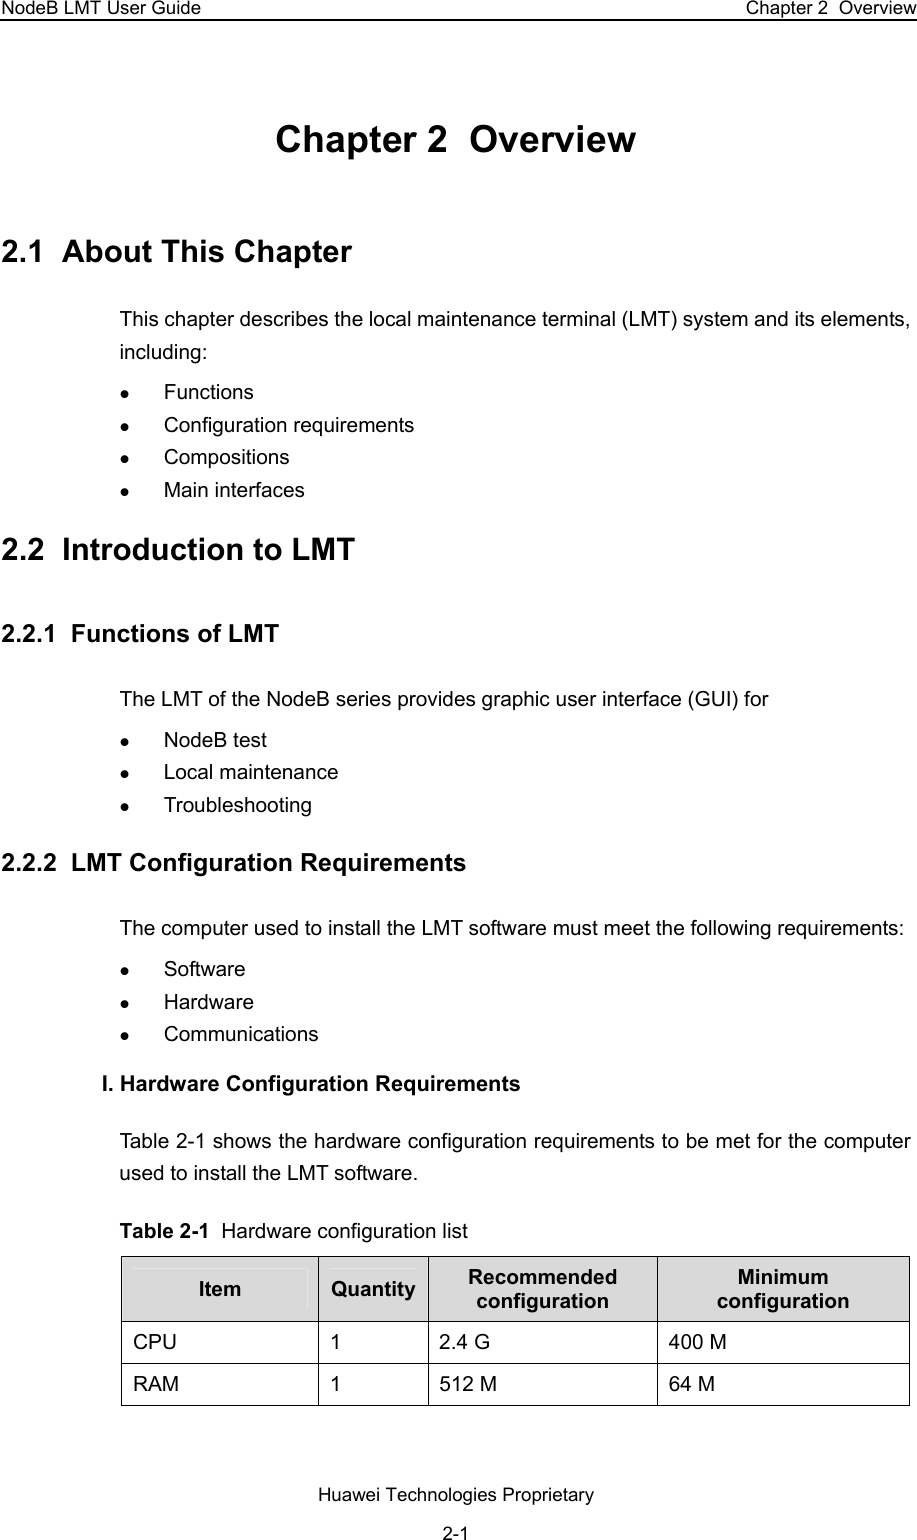 NodeB LMT User Guide  Chapter 2  Overview Chapter 2  Overview 2.1  About This Chapter This chapter describes the local maintenance terminal (LMT) system and its elements, including: z Functions z Configuration requirements z Compositions z Main interfaces 2.2  Introduction to LMT 2.2.1  Functions of LMT The LMT of the NodeB series provides graphic user interface (GUI) for z NodeB test z Local maintenance z Troubleshooting 2.2.2  LMT Configuration Requirements  The computer used to install the LMT software must meet the following requirements: z Software  z Hardware z Communications I. Hardware Configuration Requirements  Table 2-1 shows the hardware configuration requirements to be met for the computer used to install the LMT software.  Table 2-1  Hardware configuration list Item  Quantity Recommended configuration Minimum configuration CPU  1  2.4 G  400 M RAM  1  512 M  64 M Huawei Technologies Proprietary 2-1 